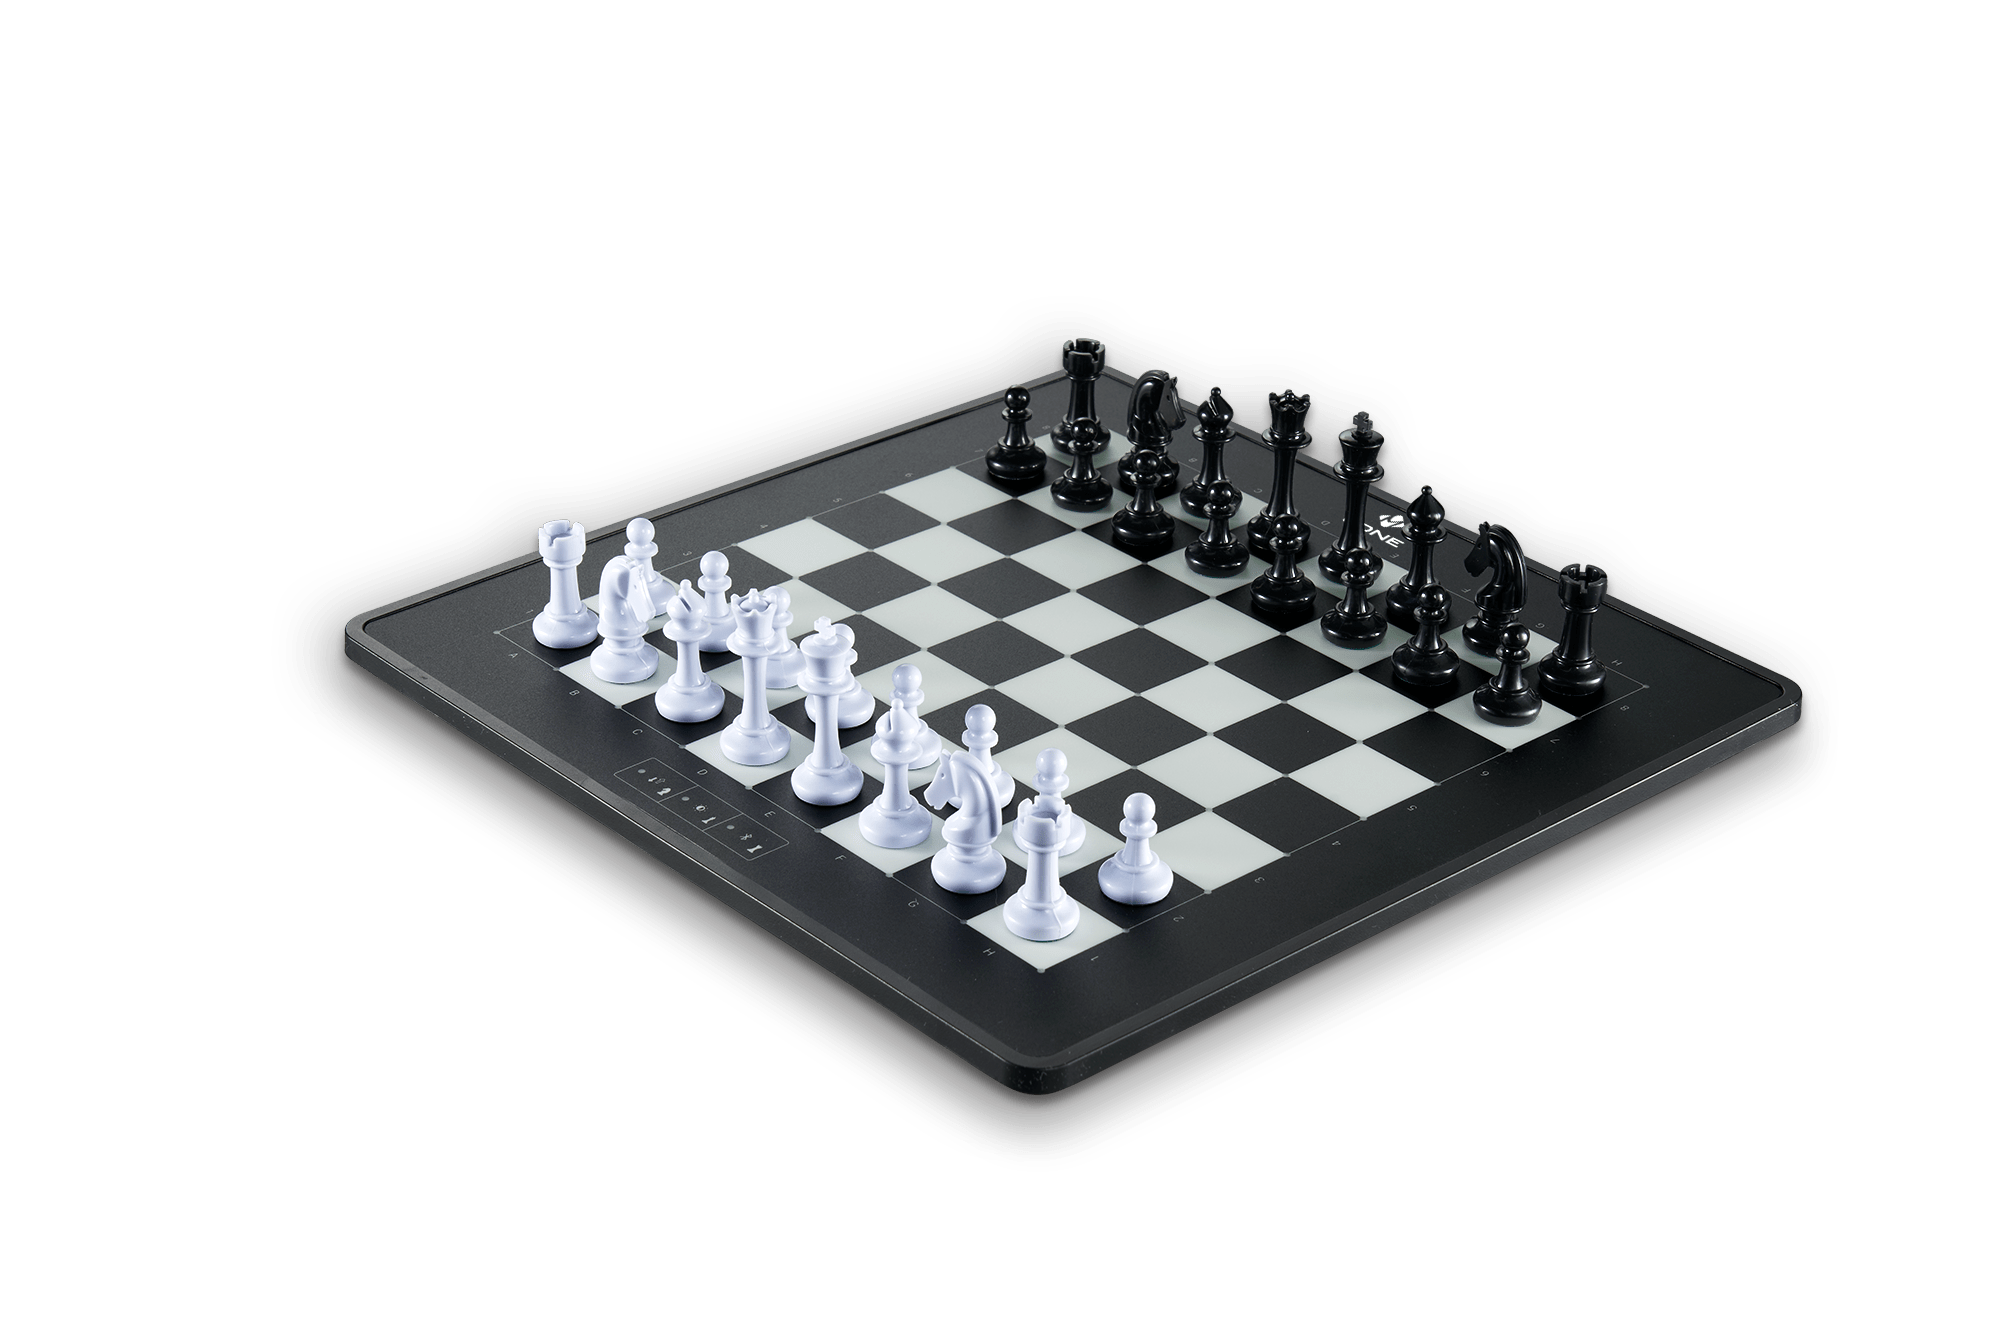  Millennium eONE Electronic Chess Board - Play Online